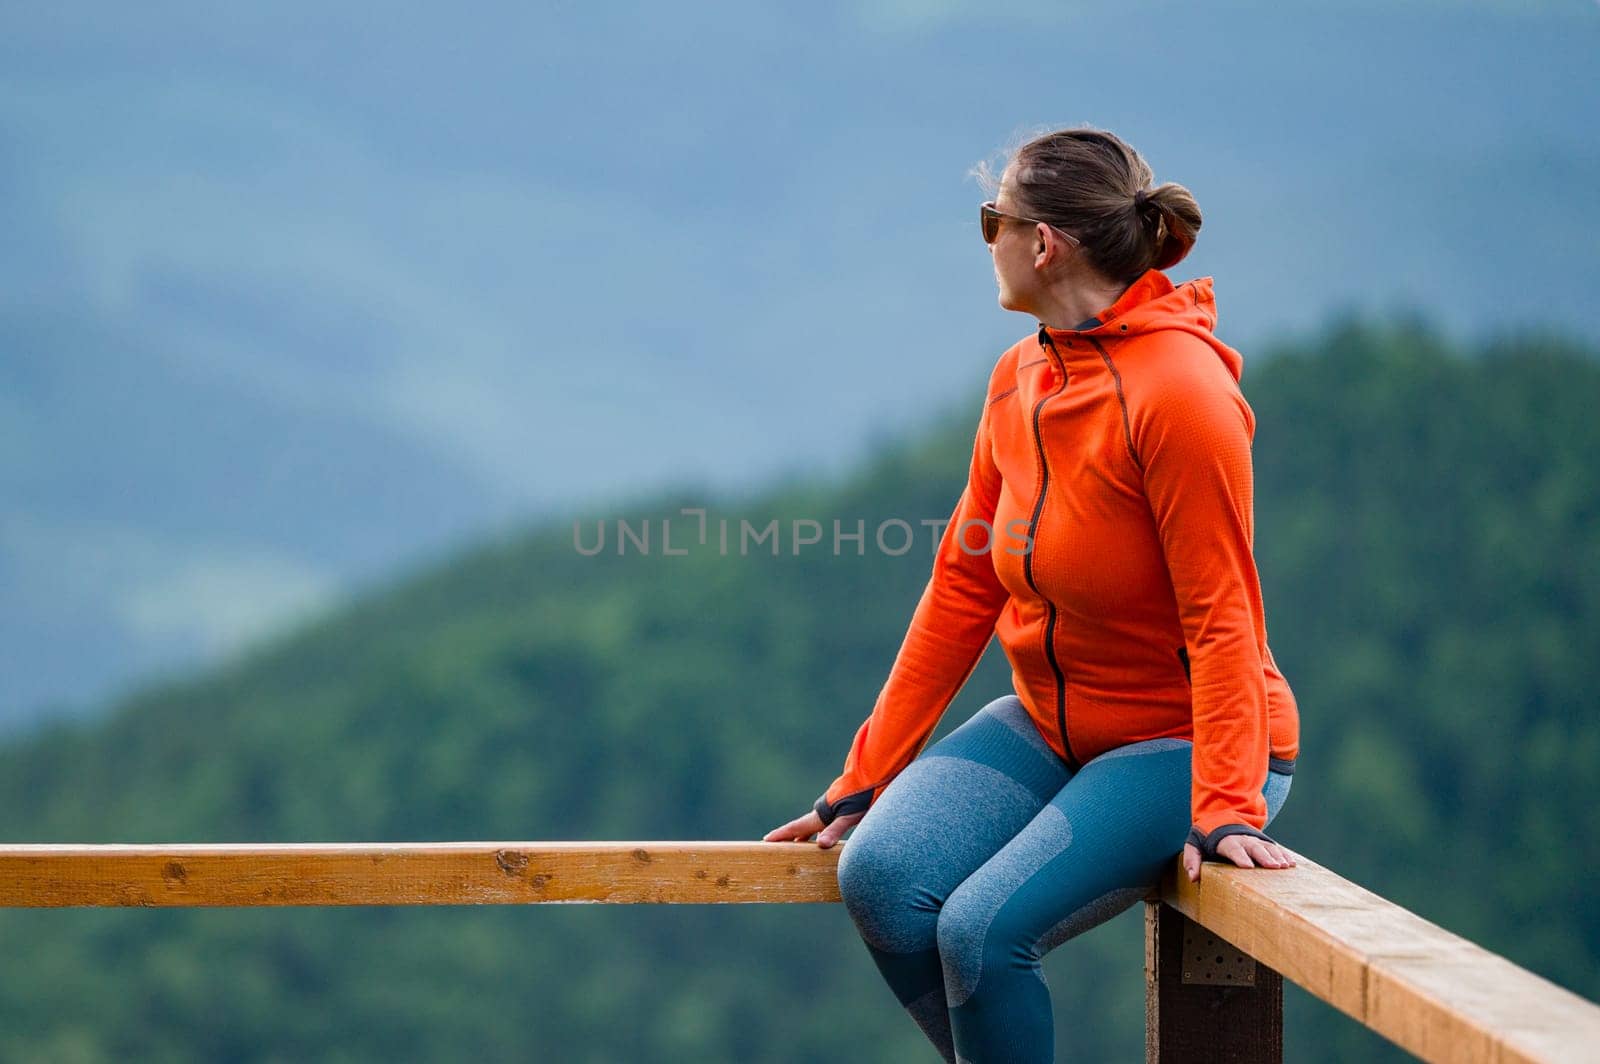 a young girl sits on a wooden handrail. by Niko_Cingaryuk